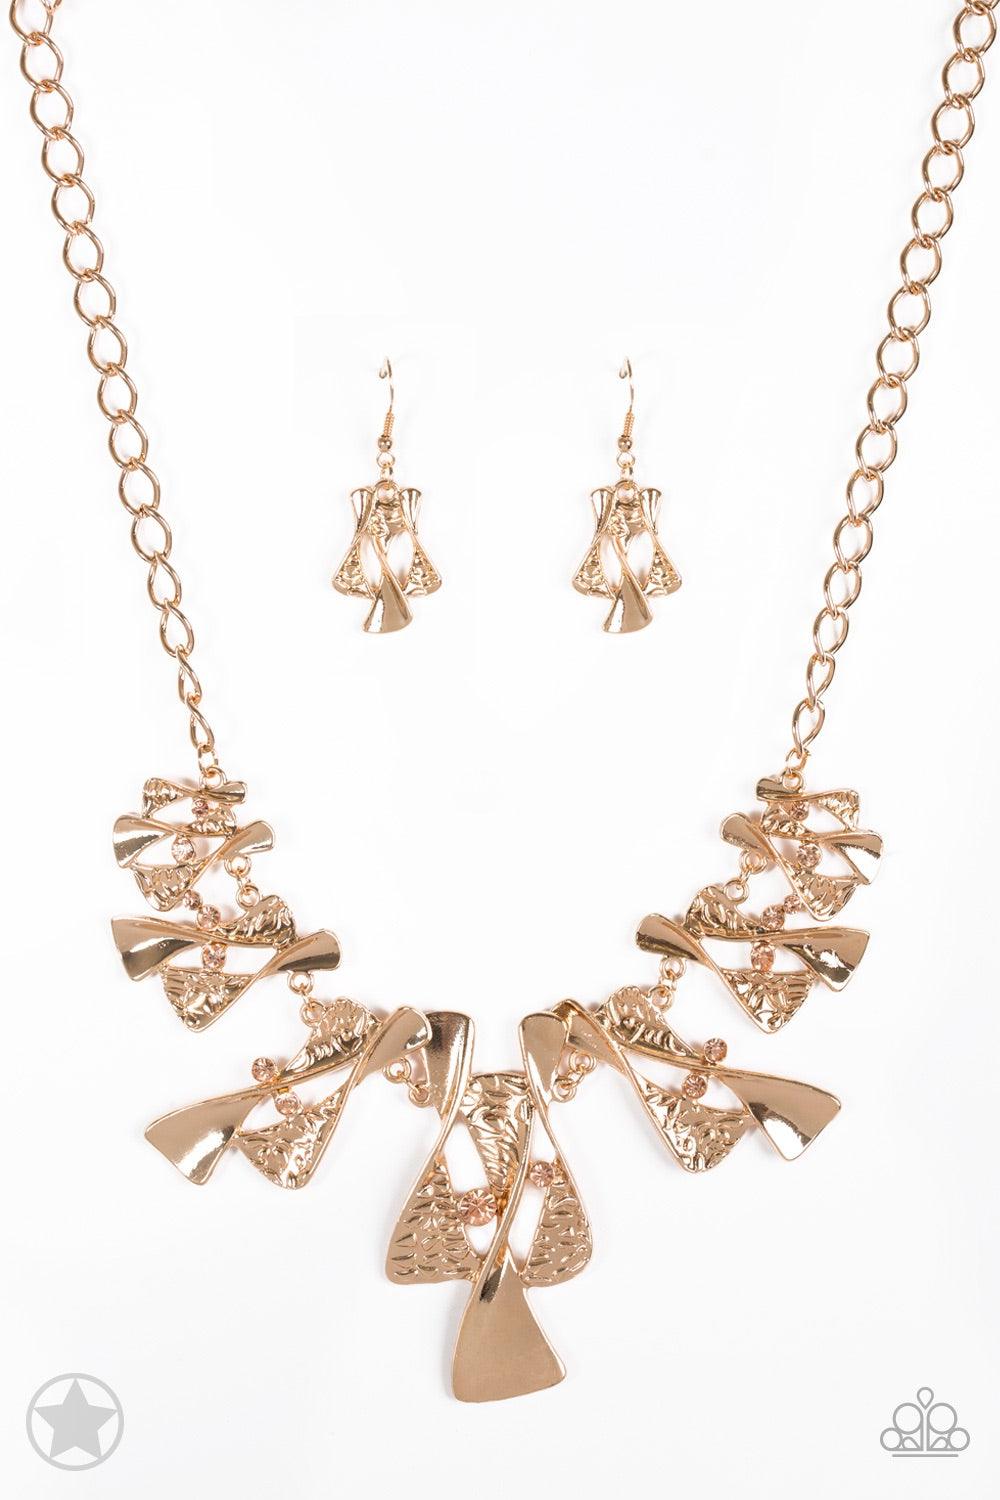 Paparazzi Accessories The Sands Of Time - Gold Twisted gold hourglasses dance along a chunky gold chain with tiny peach rhinestones adding sparkling, elegant accents. Beautiful textured pieces add depth to the design. Features an adjustable clasp closure.